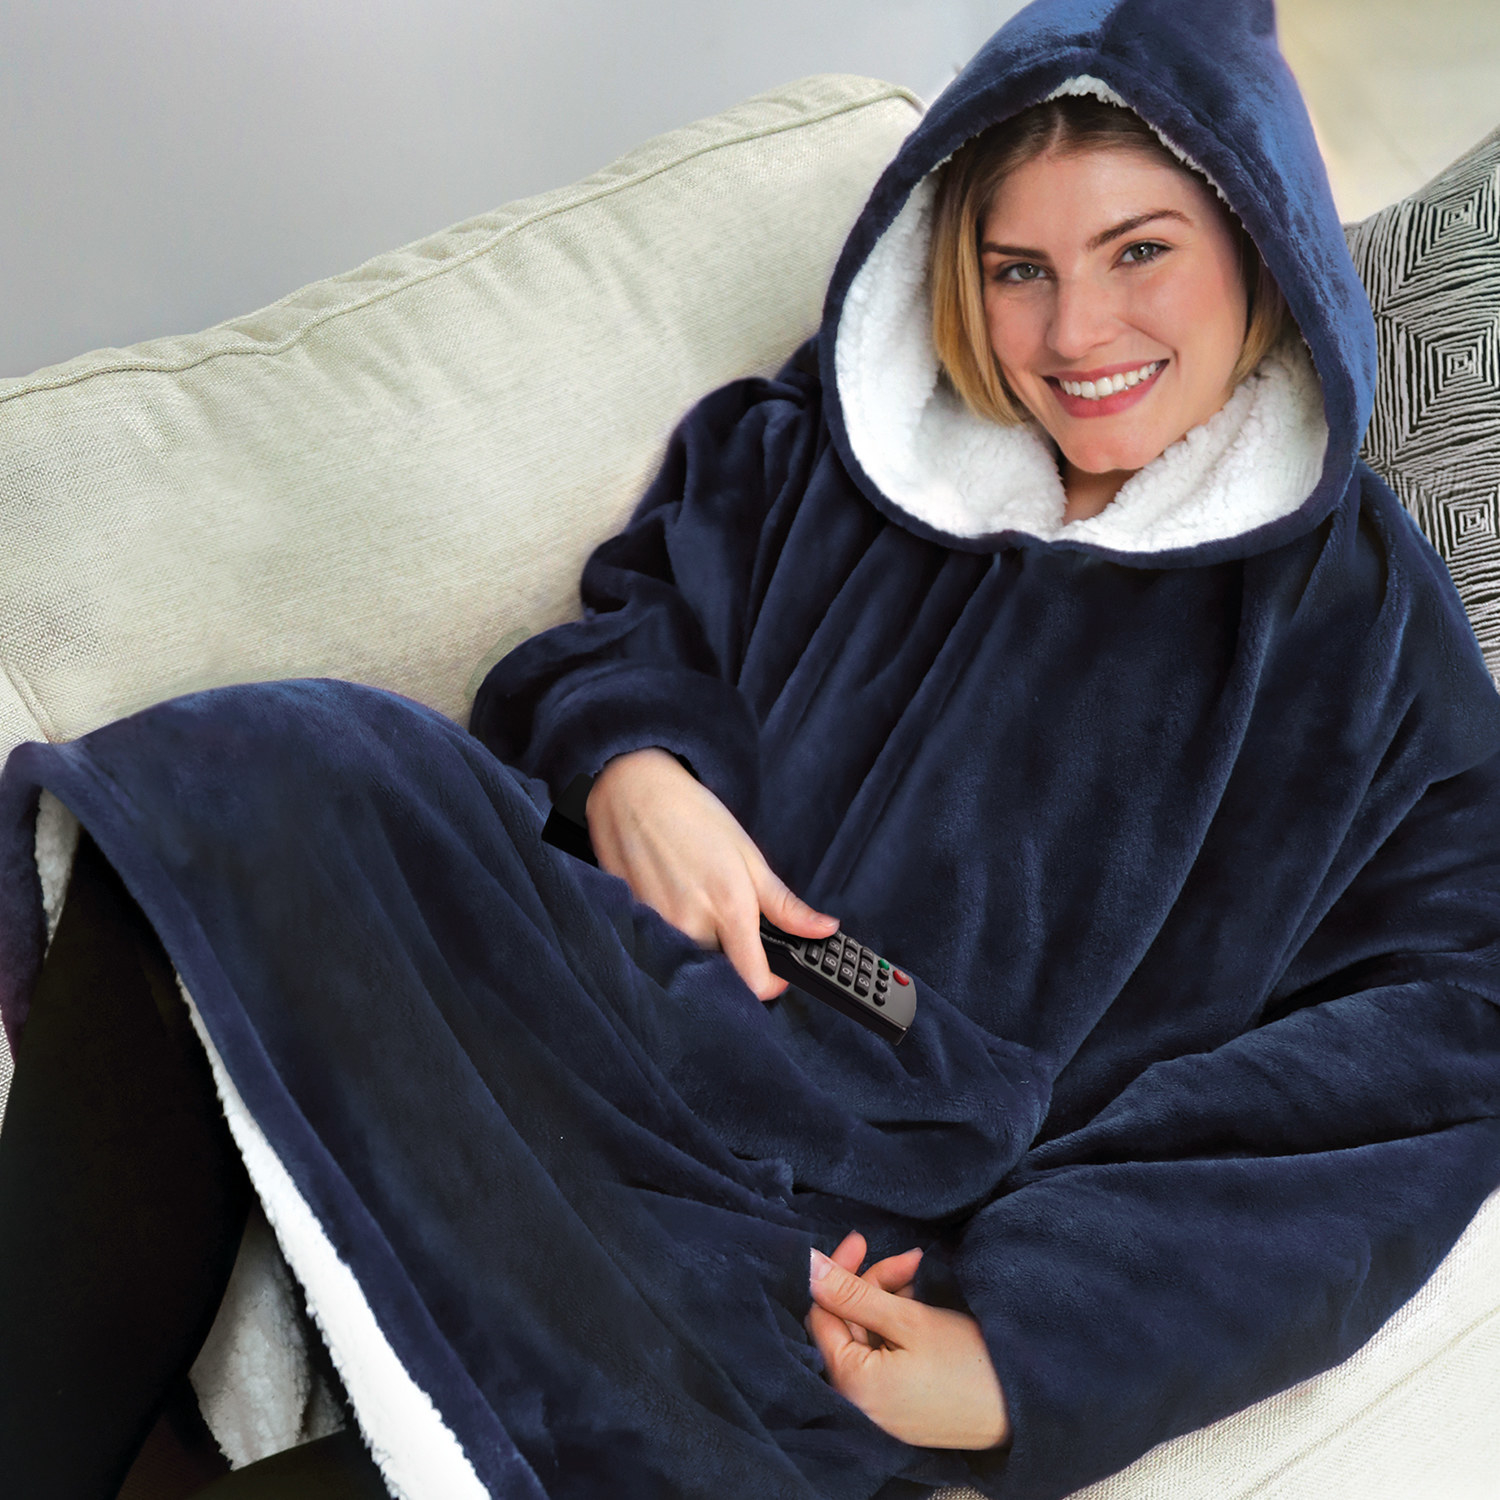 woman wearing a navy hoodie blanket sitting on a couch